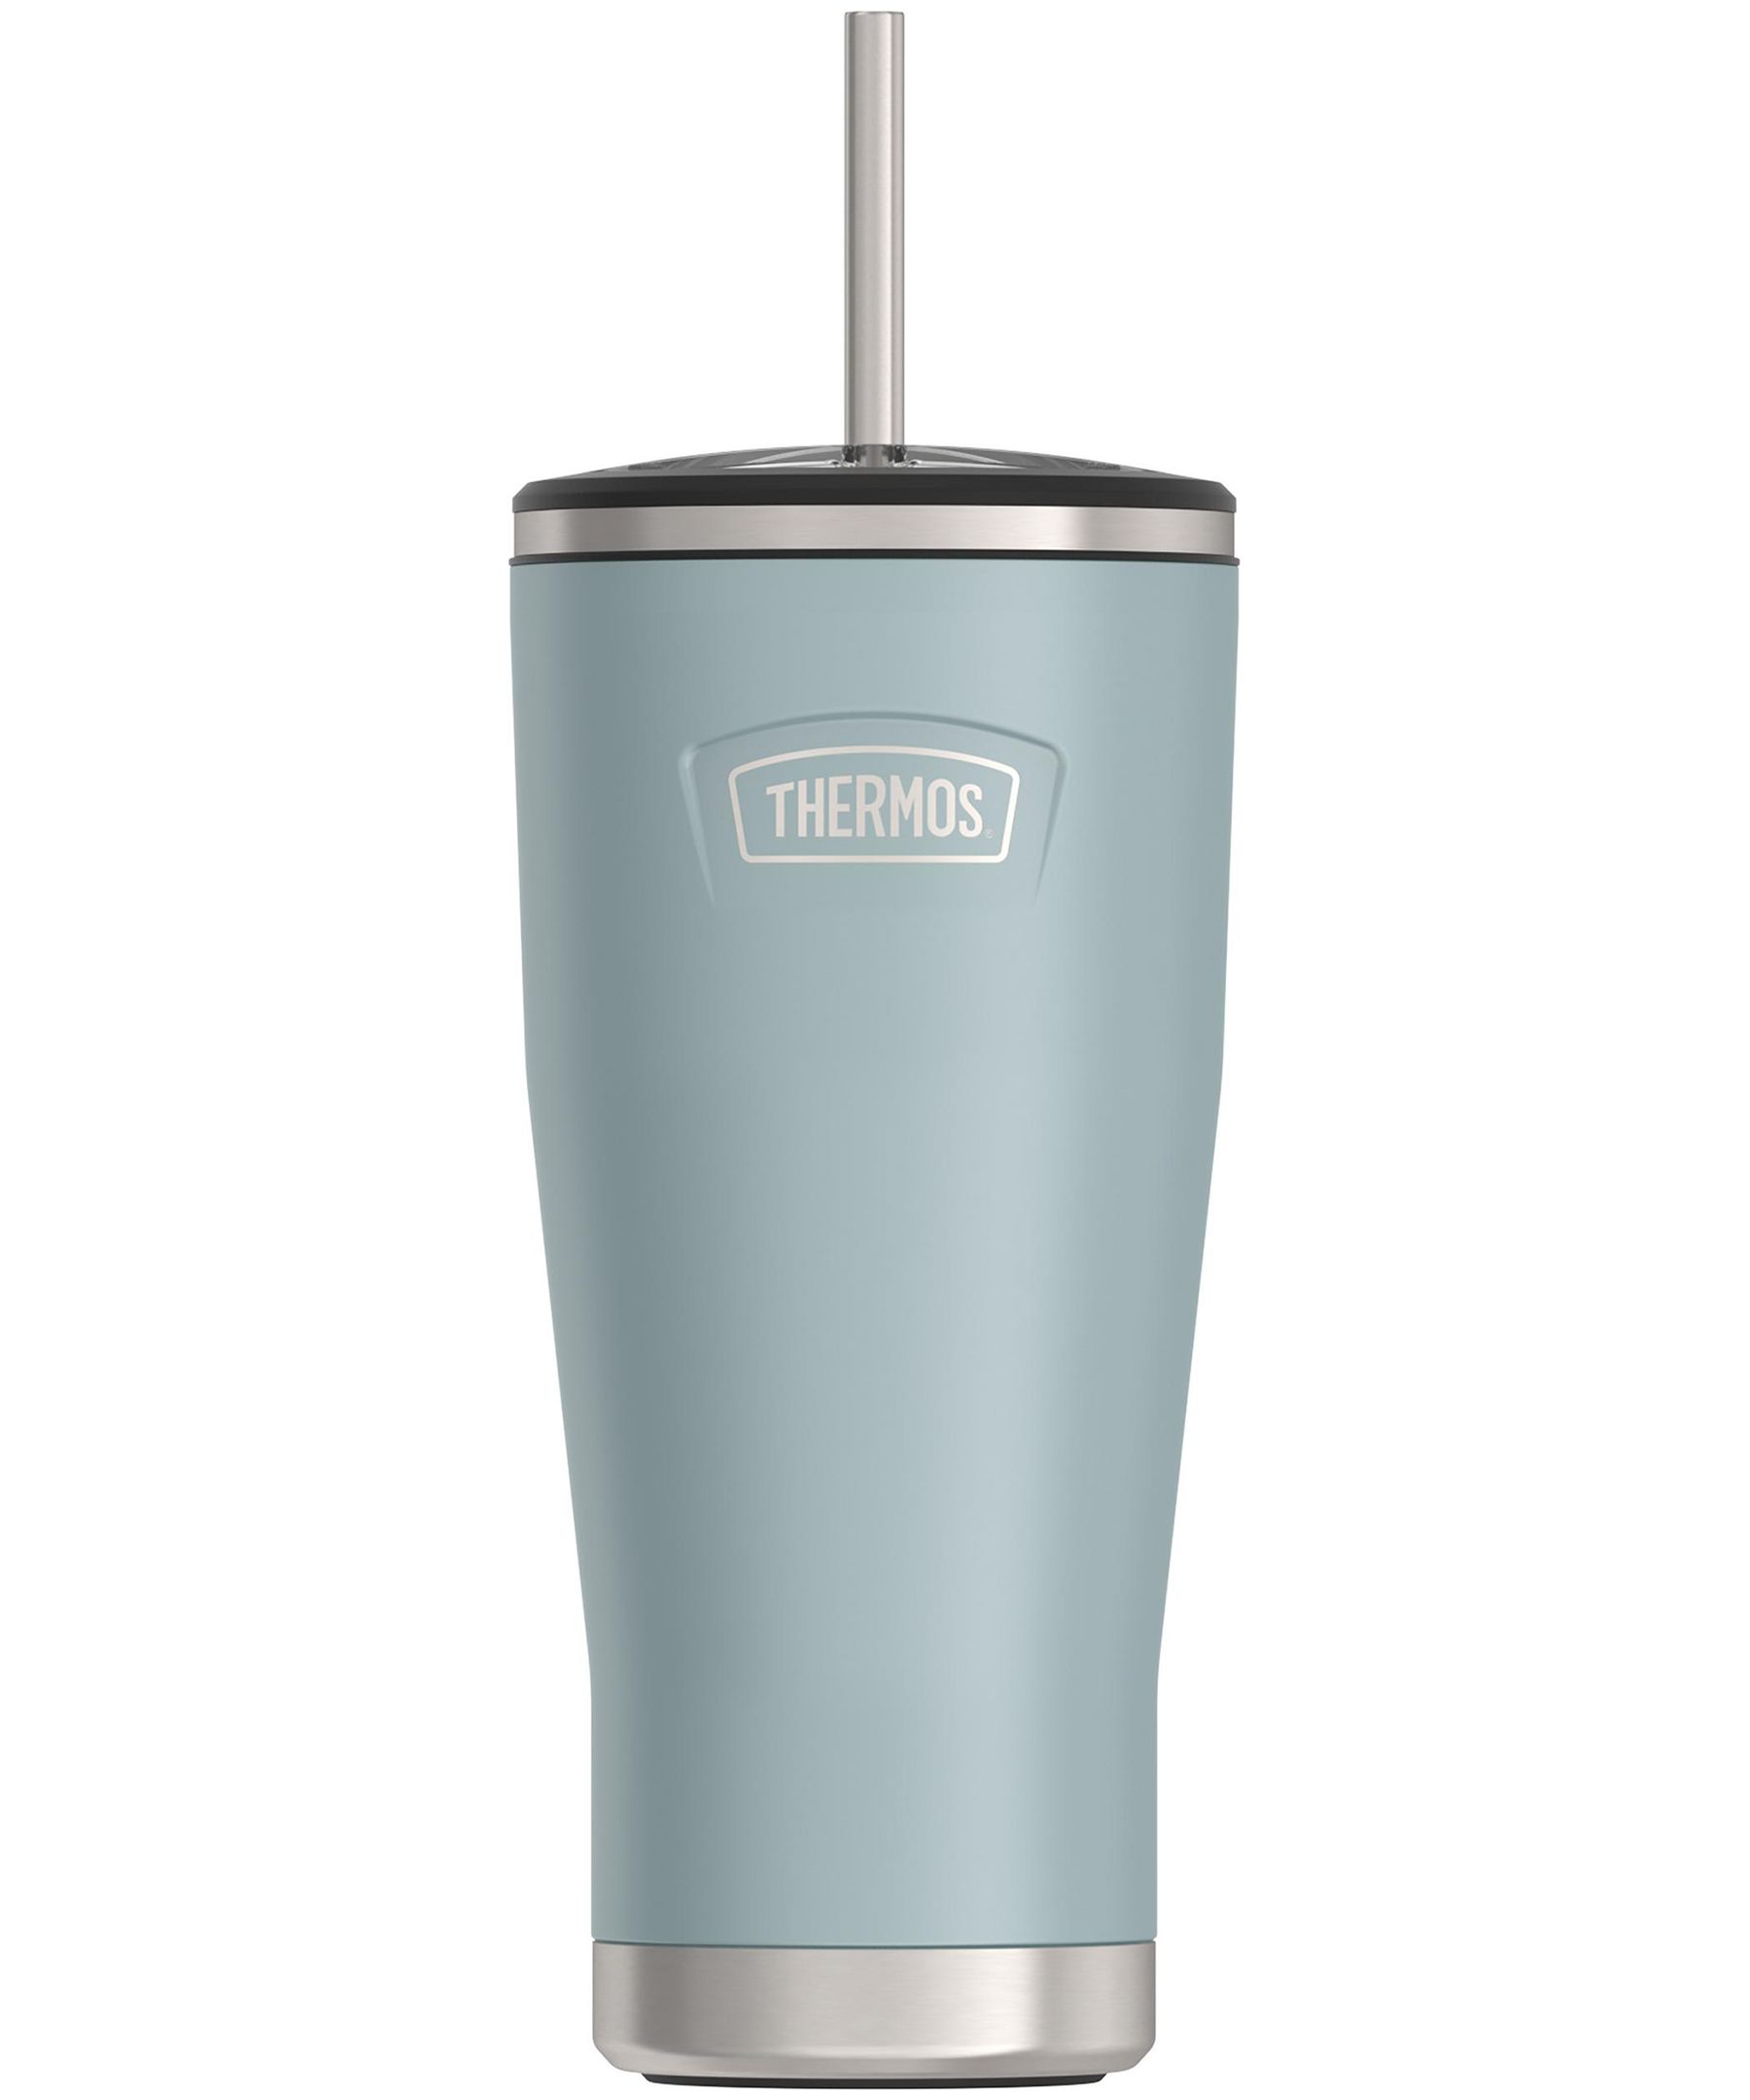 https://media-www.marks.com/product/marks-work-wearhouse/industrial-world/mens-accessories/410035840449/thermos-cold-dome-stainless-steel-tumbler-with-straw-710-ml-67fb663e-3bfd-48bc-bde5-bf98e095382c-jpgrendition.jpg